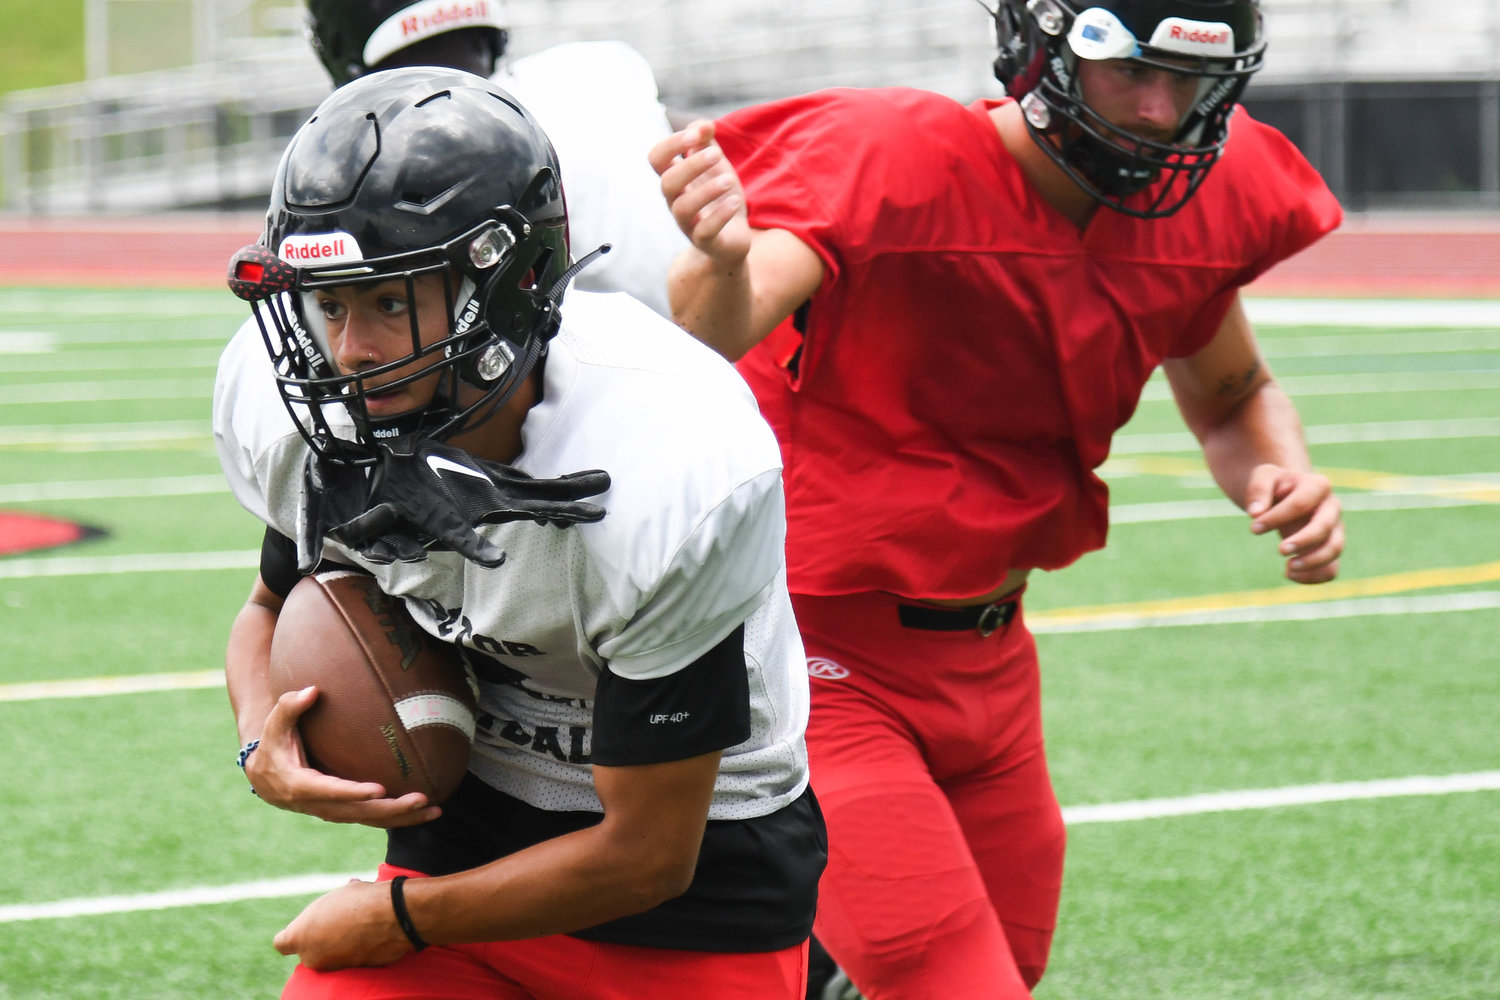 Proctor’s Israel Matos takes a handoff on a jet sweep during practice on Aug. 30. The Raiders return a mix of experience for the fall season.